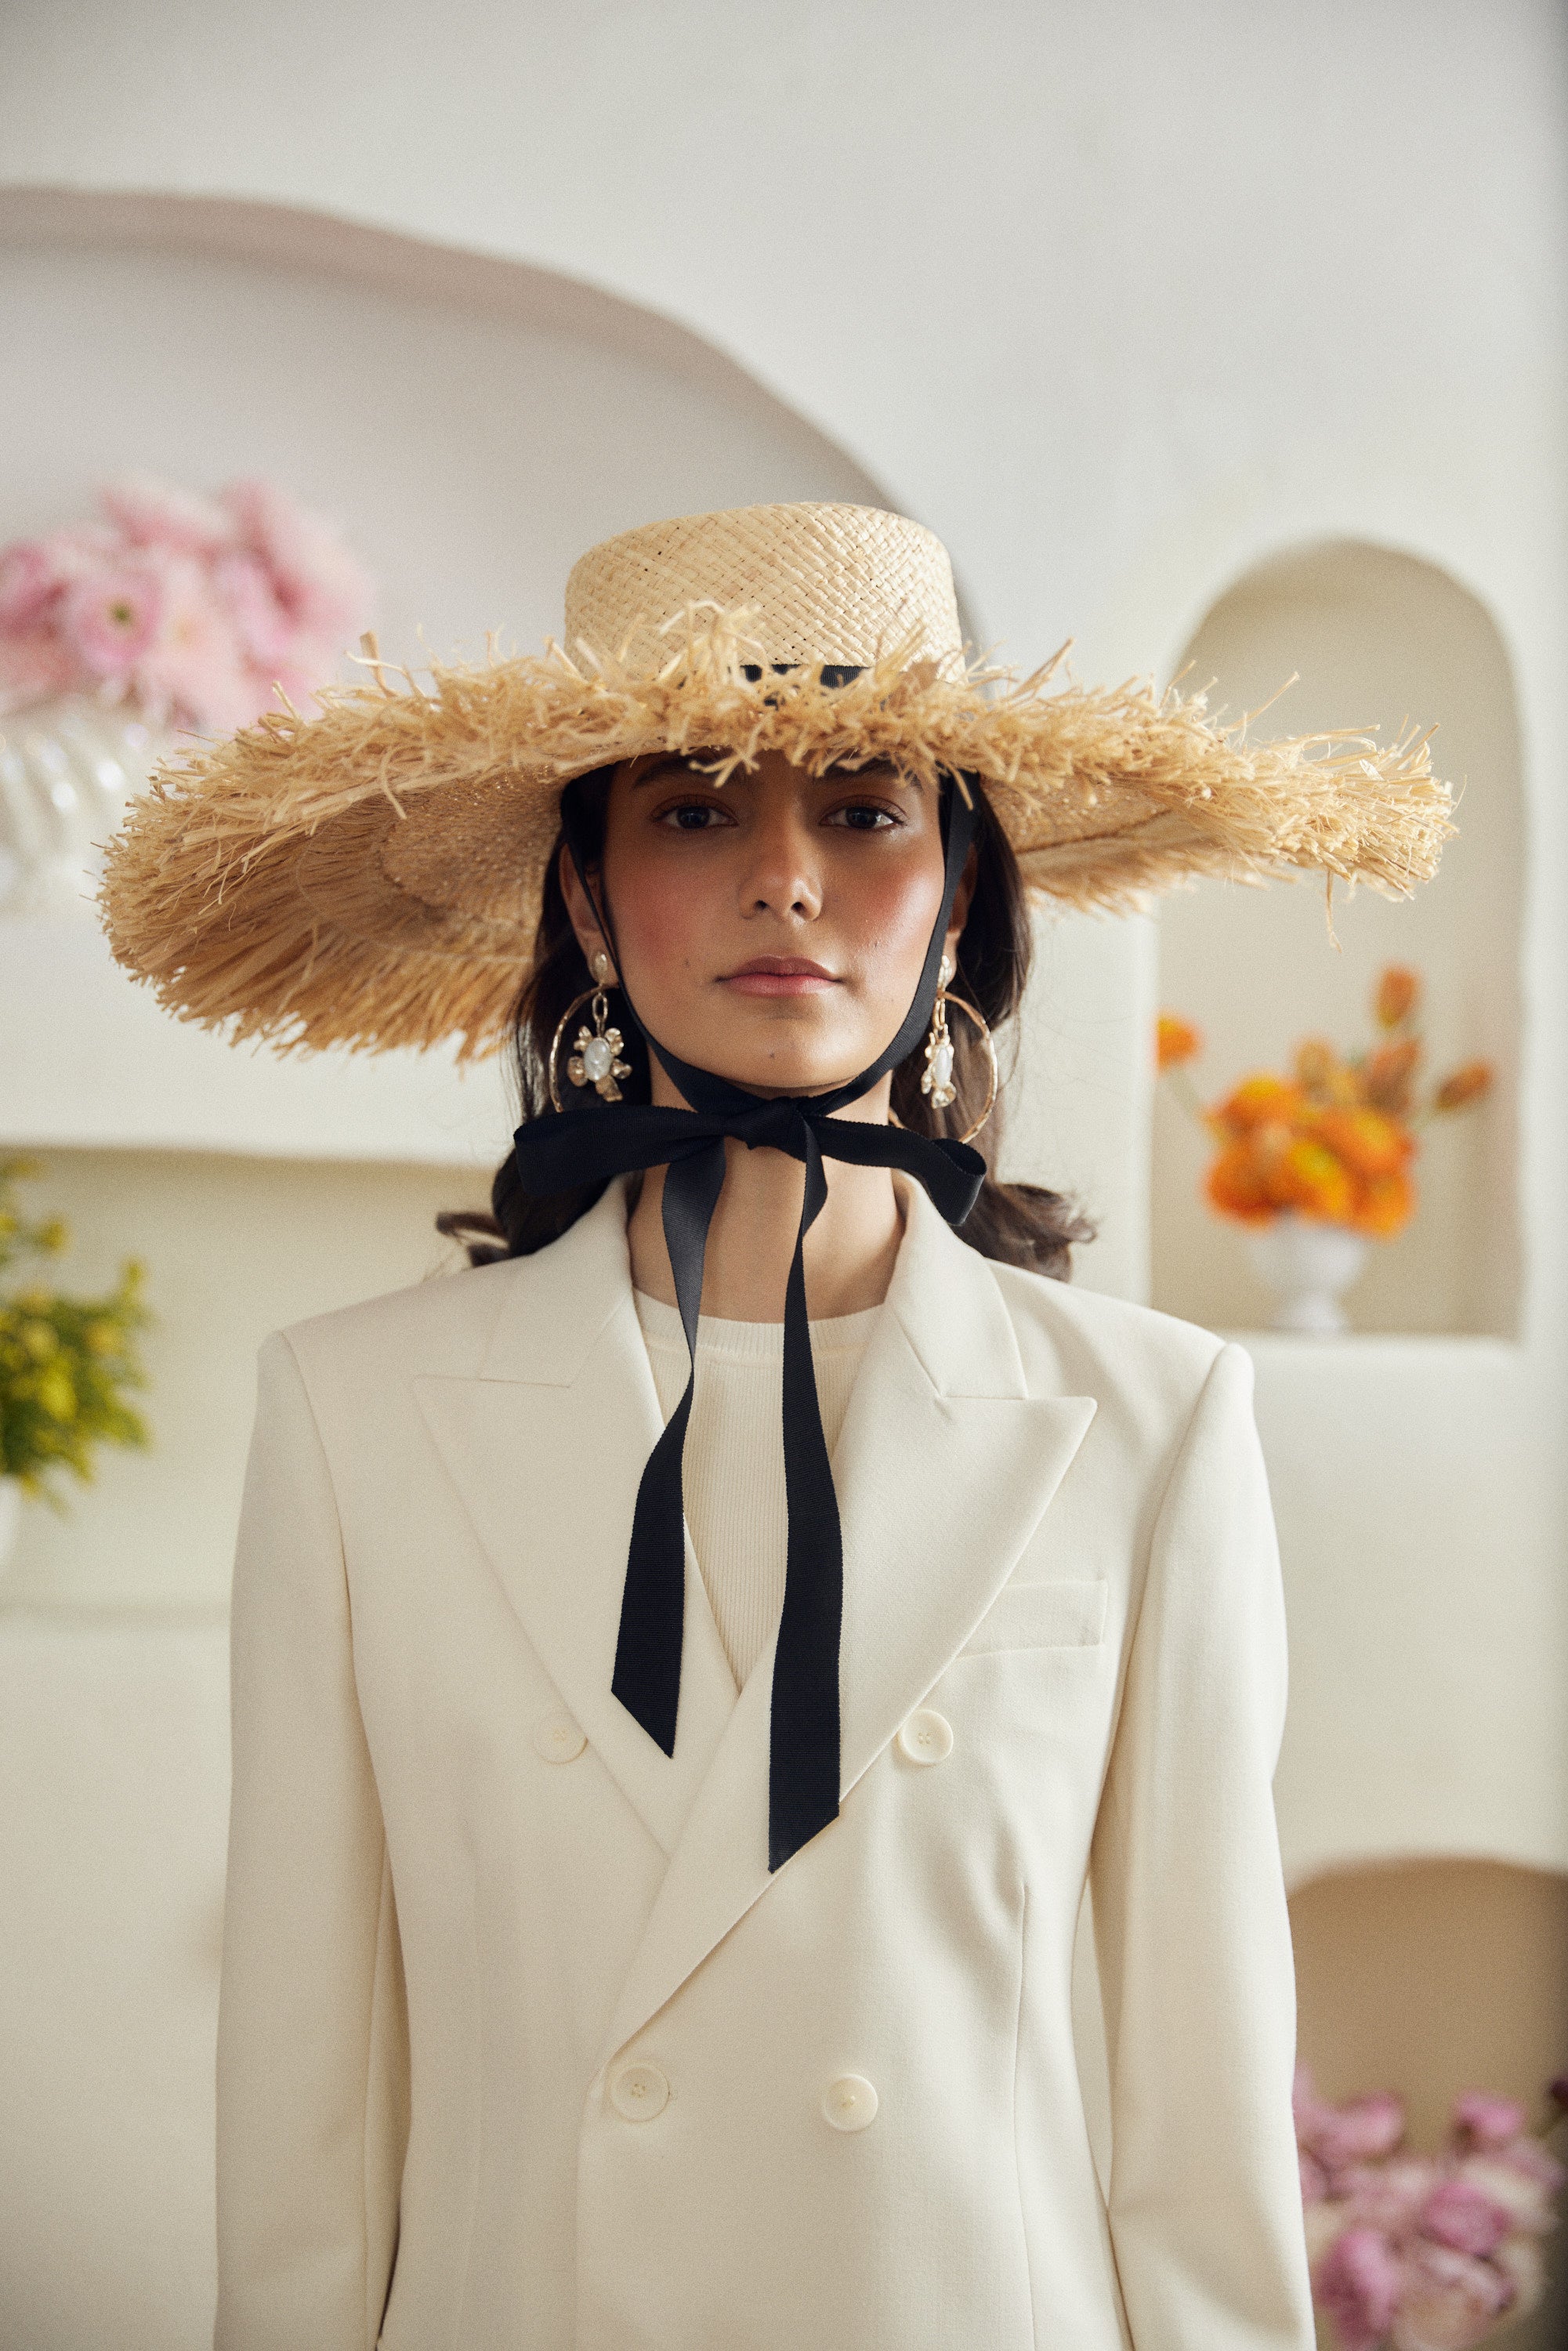 Dahlia straw hat - Extra wide with fringed edge and detachable ribbon